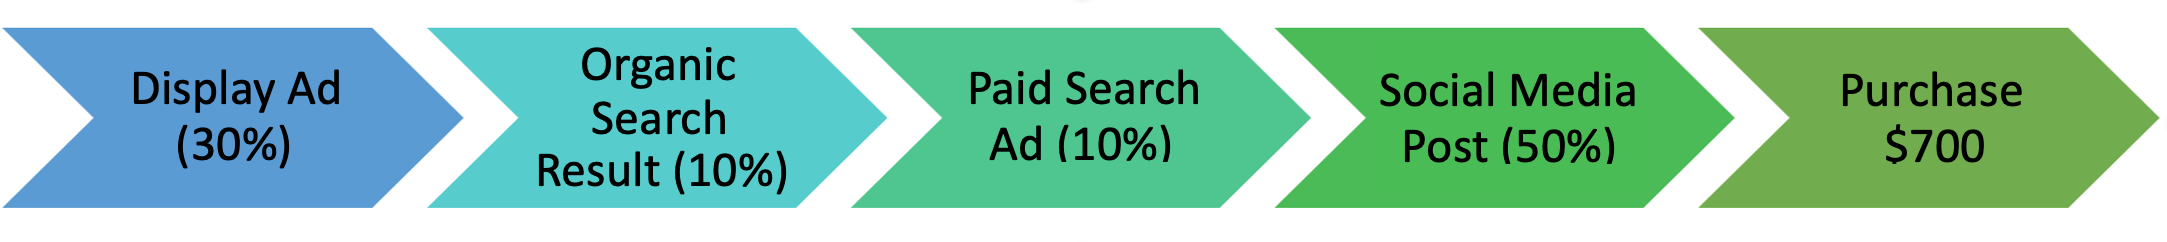 display ad 30%, organic search result 10%, paid search ad 10%, social media post 50%, purchase $700